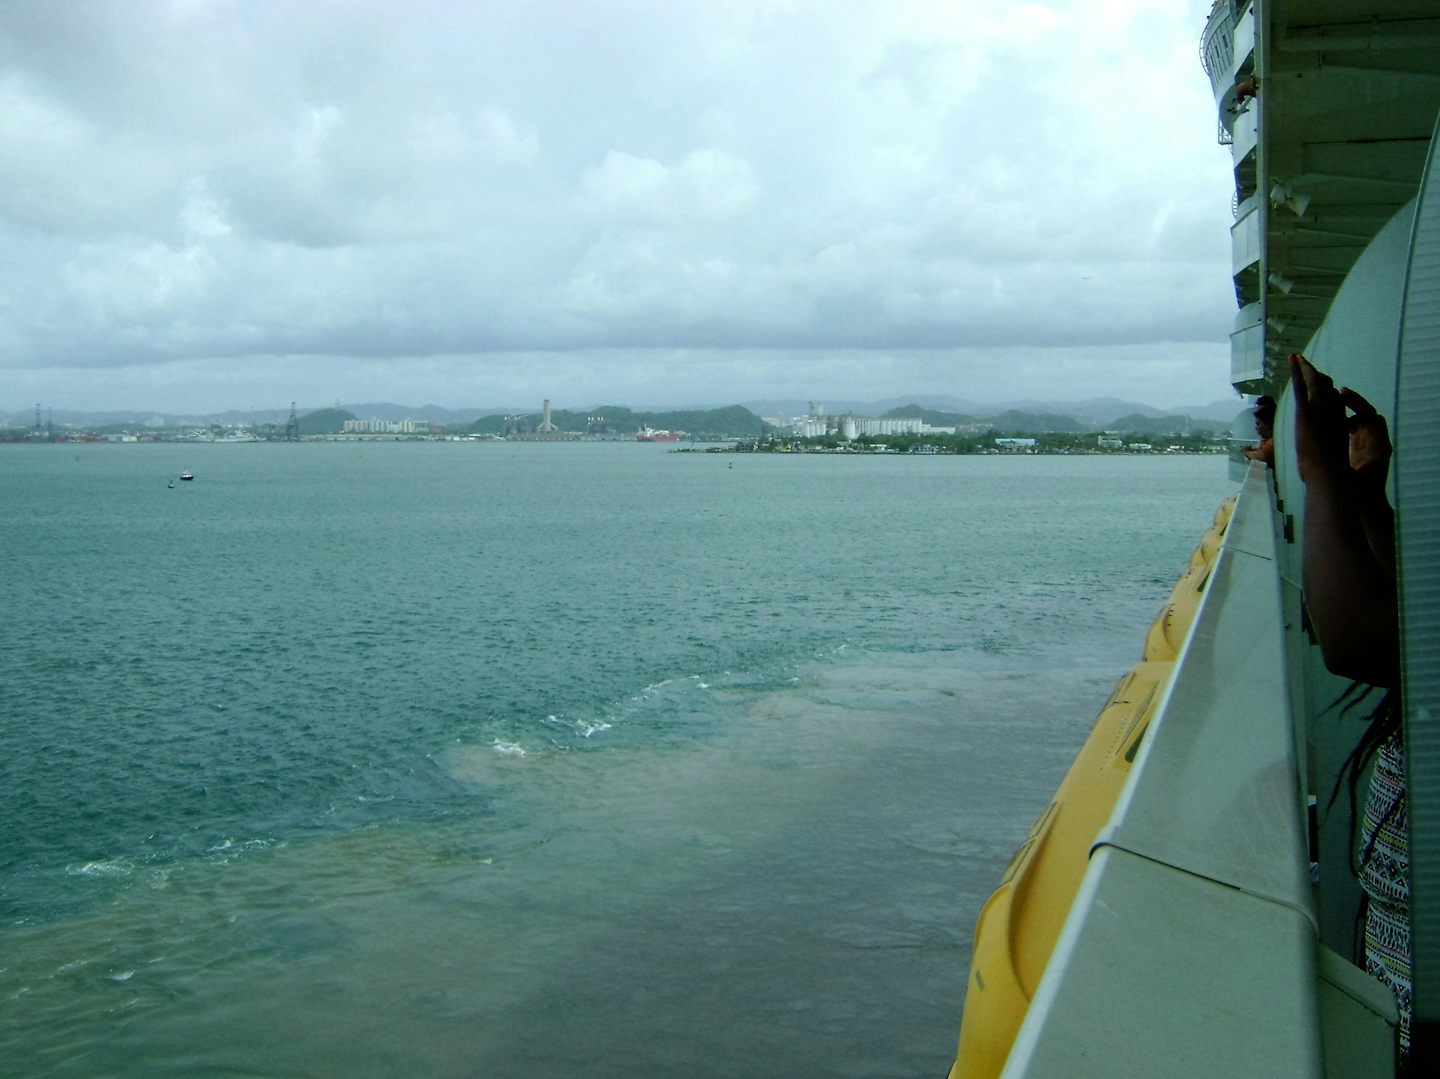 View out of room balcony, as we are leaving San Juan.